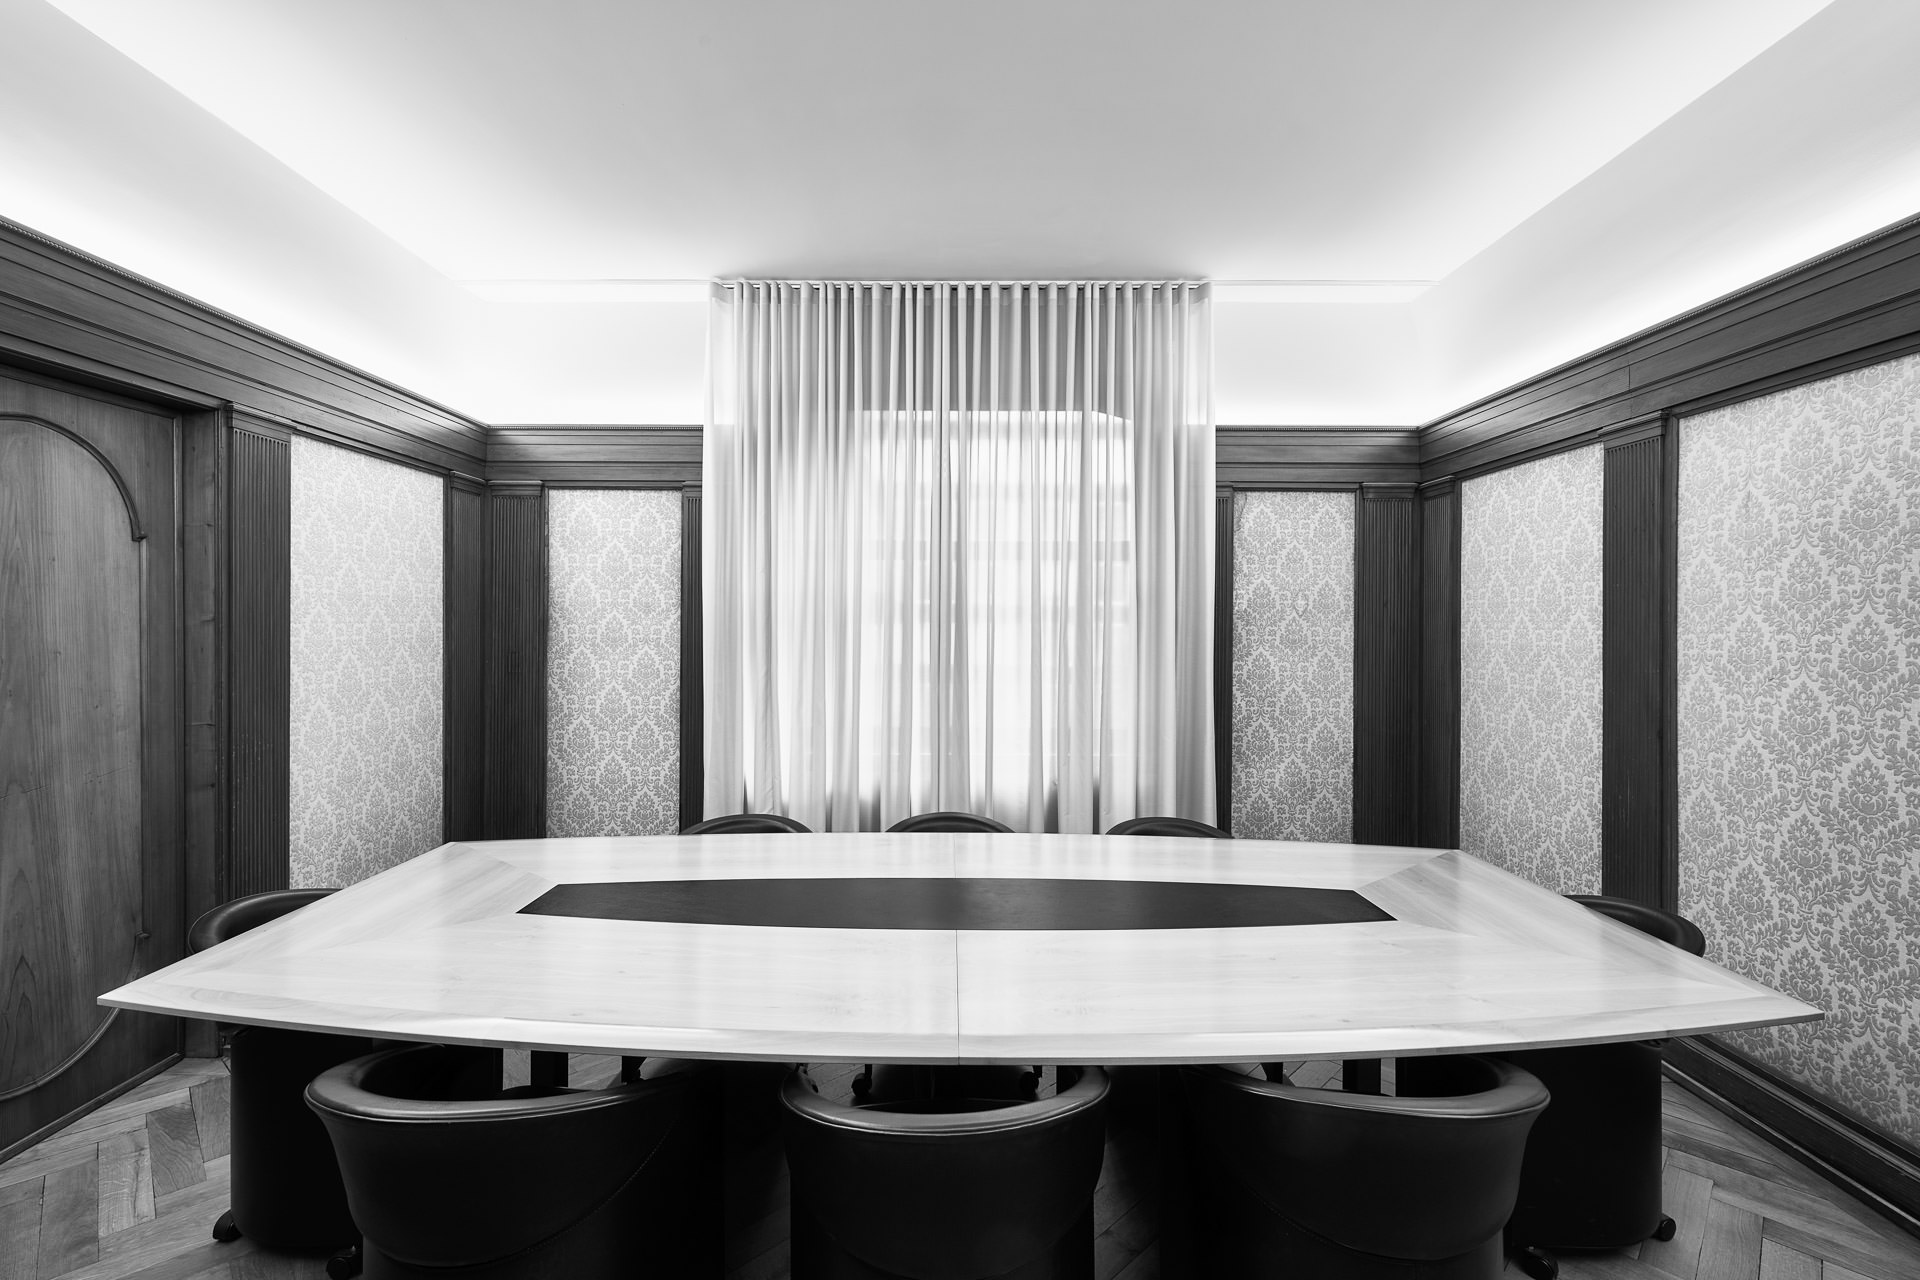 Meeting Room, office interior photography, Architectural Photography Branding